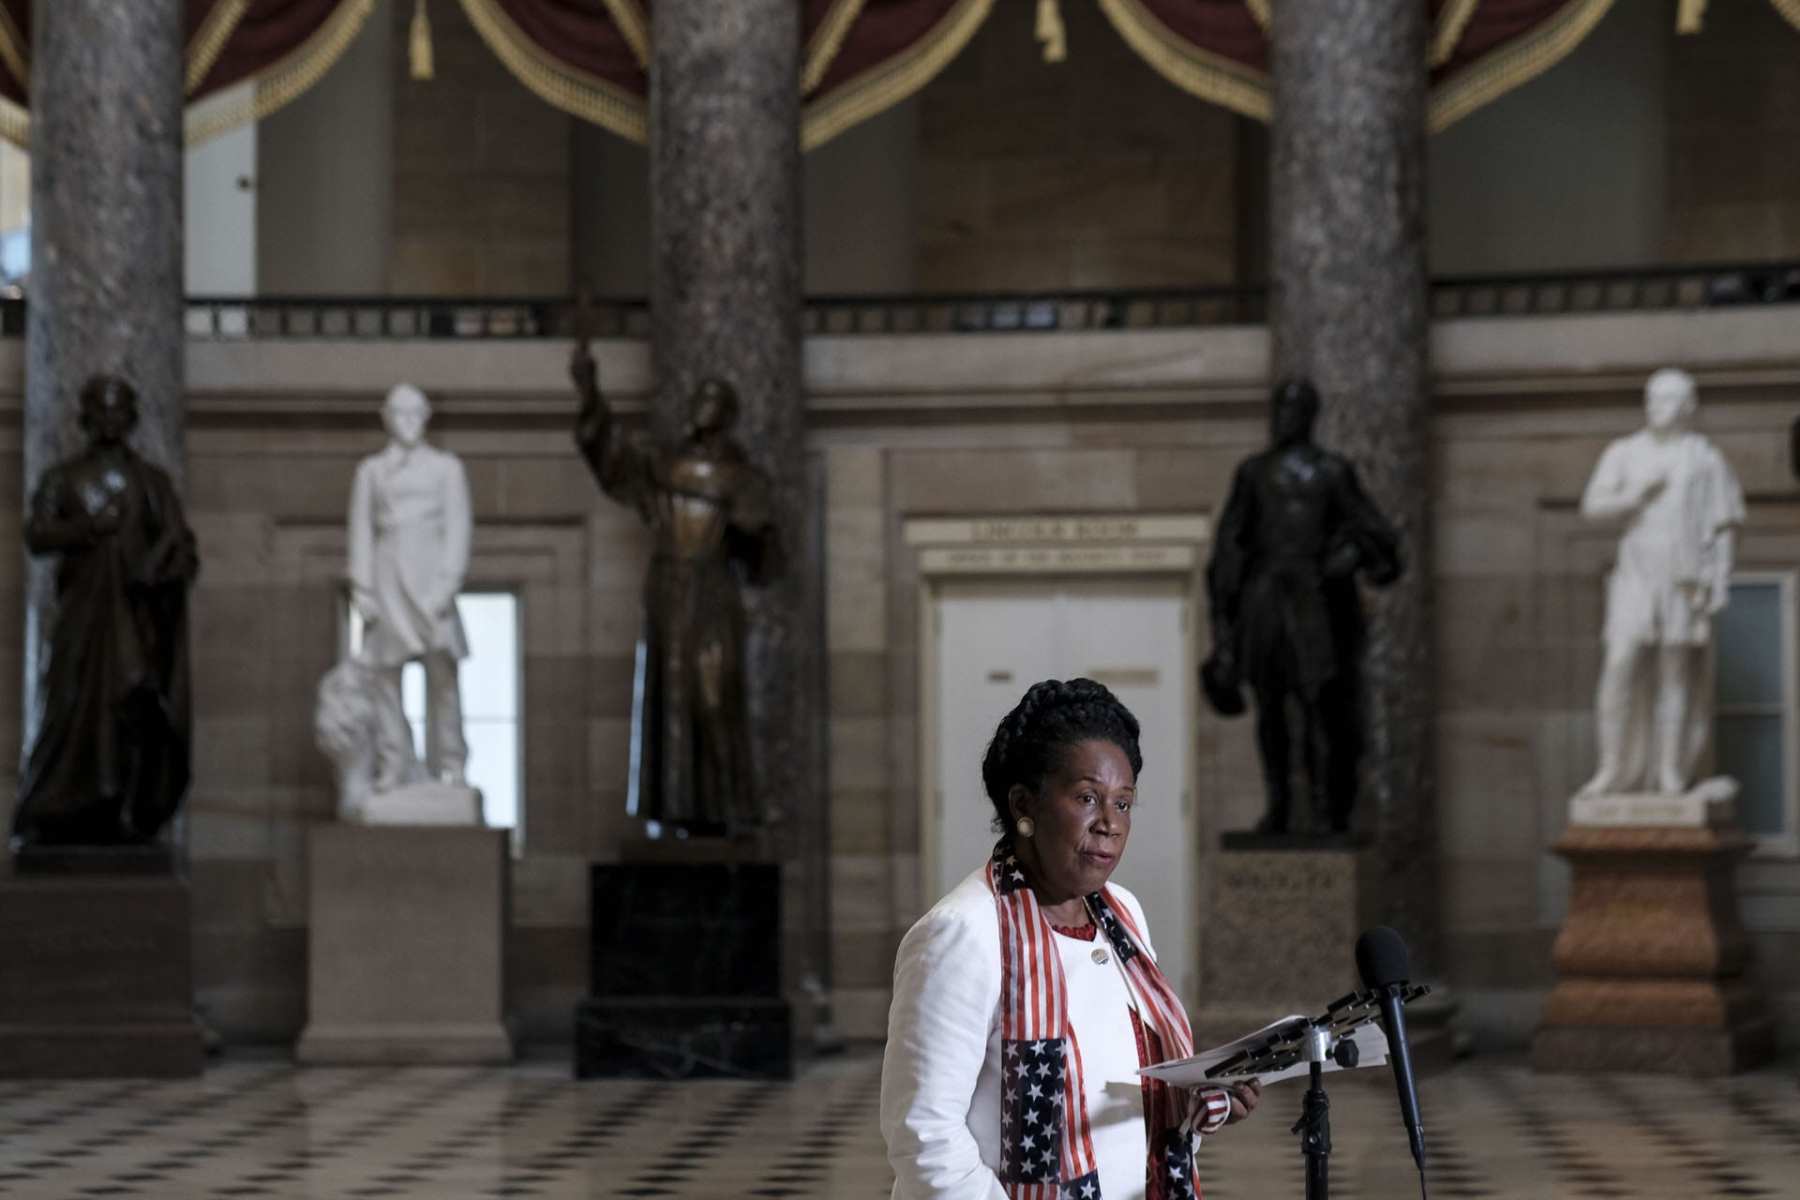 Rep. Sheila Jackson Lee in the Capitol.